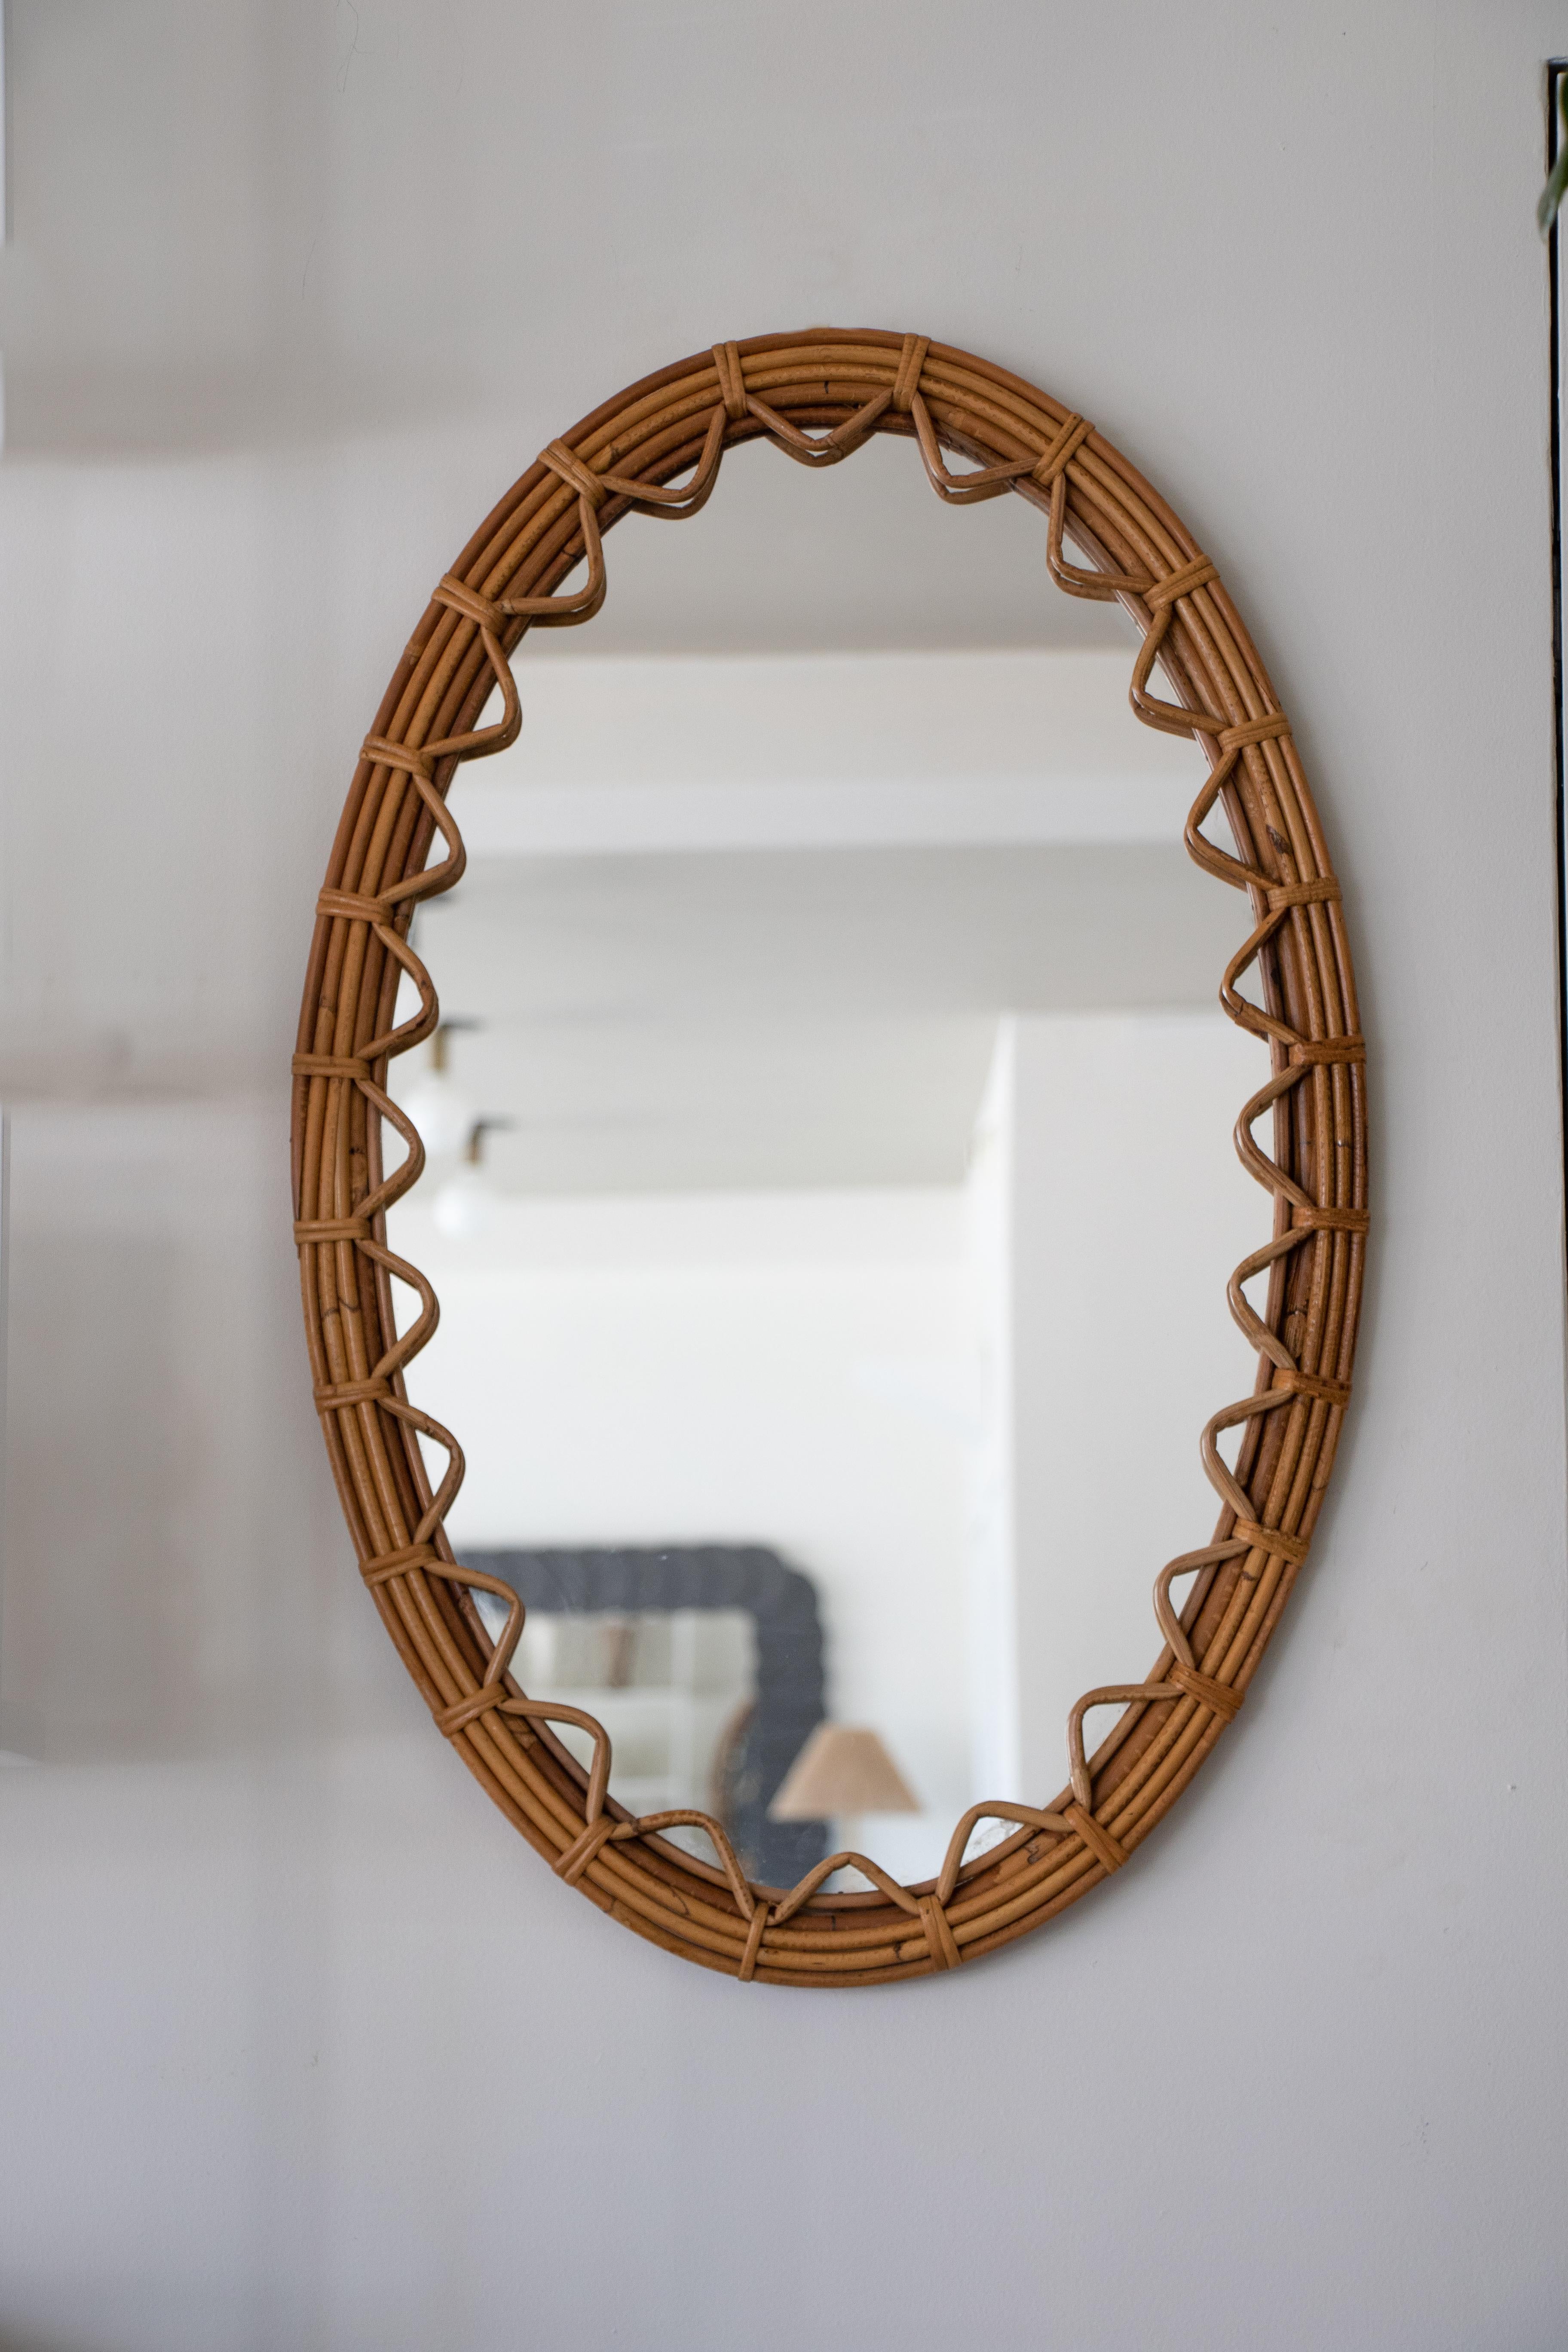 Beautiful large rattan mirror in an oval shape from Spain, 1960's. Unique design with zig-zag rattan detailing encompassing the mirror. Great size, perfect for bathroom or entryway. Nice vintage condition with original rattan frame and newly